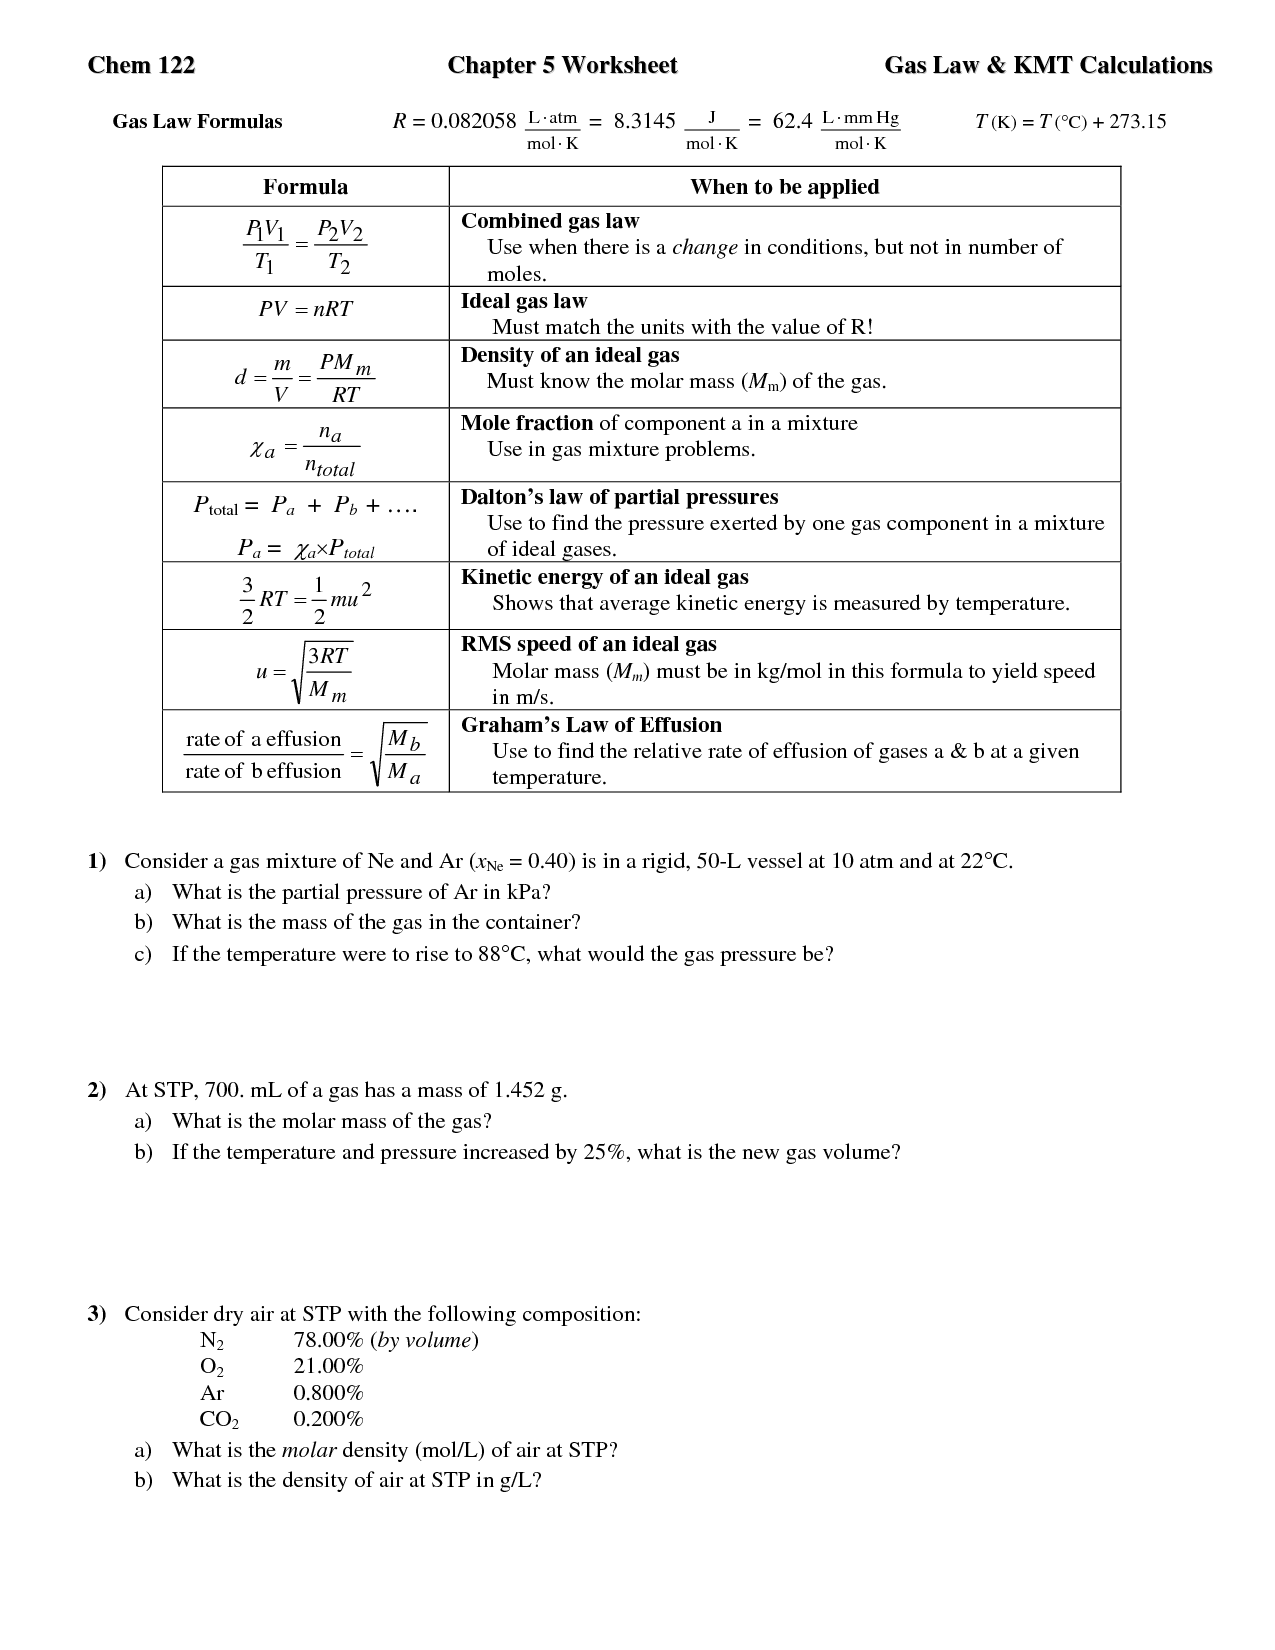 8-best-images-of-chemistry-gas-laws-worksheet-ideal-gas-law-worksheet-answer-key-ideal-gas